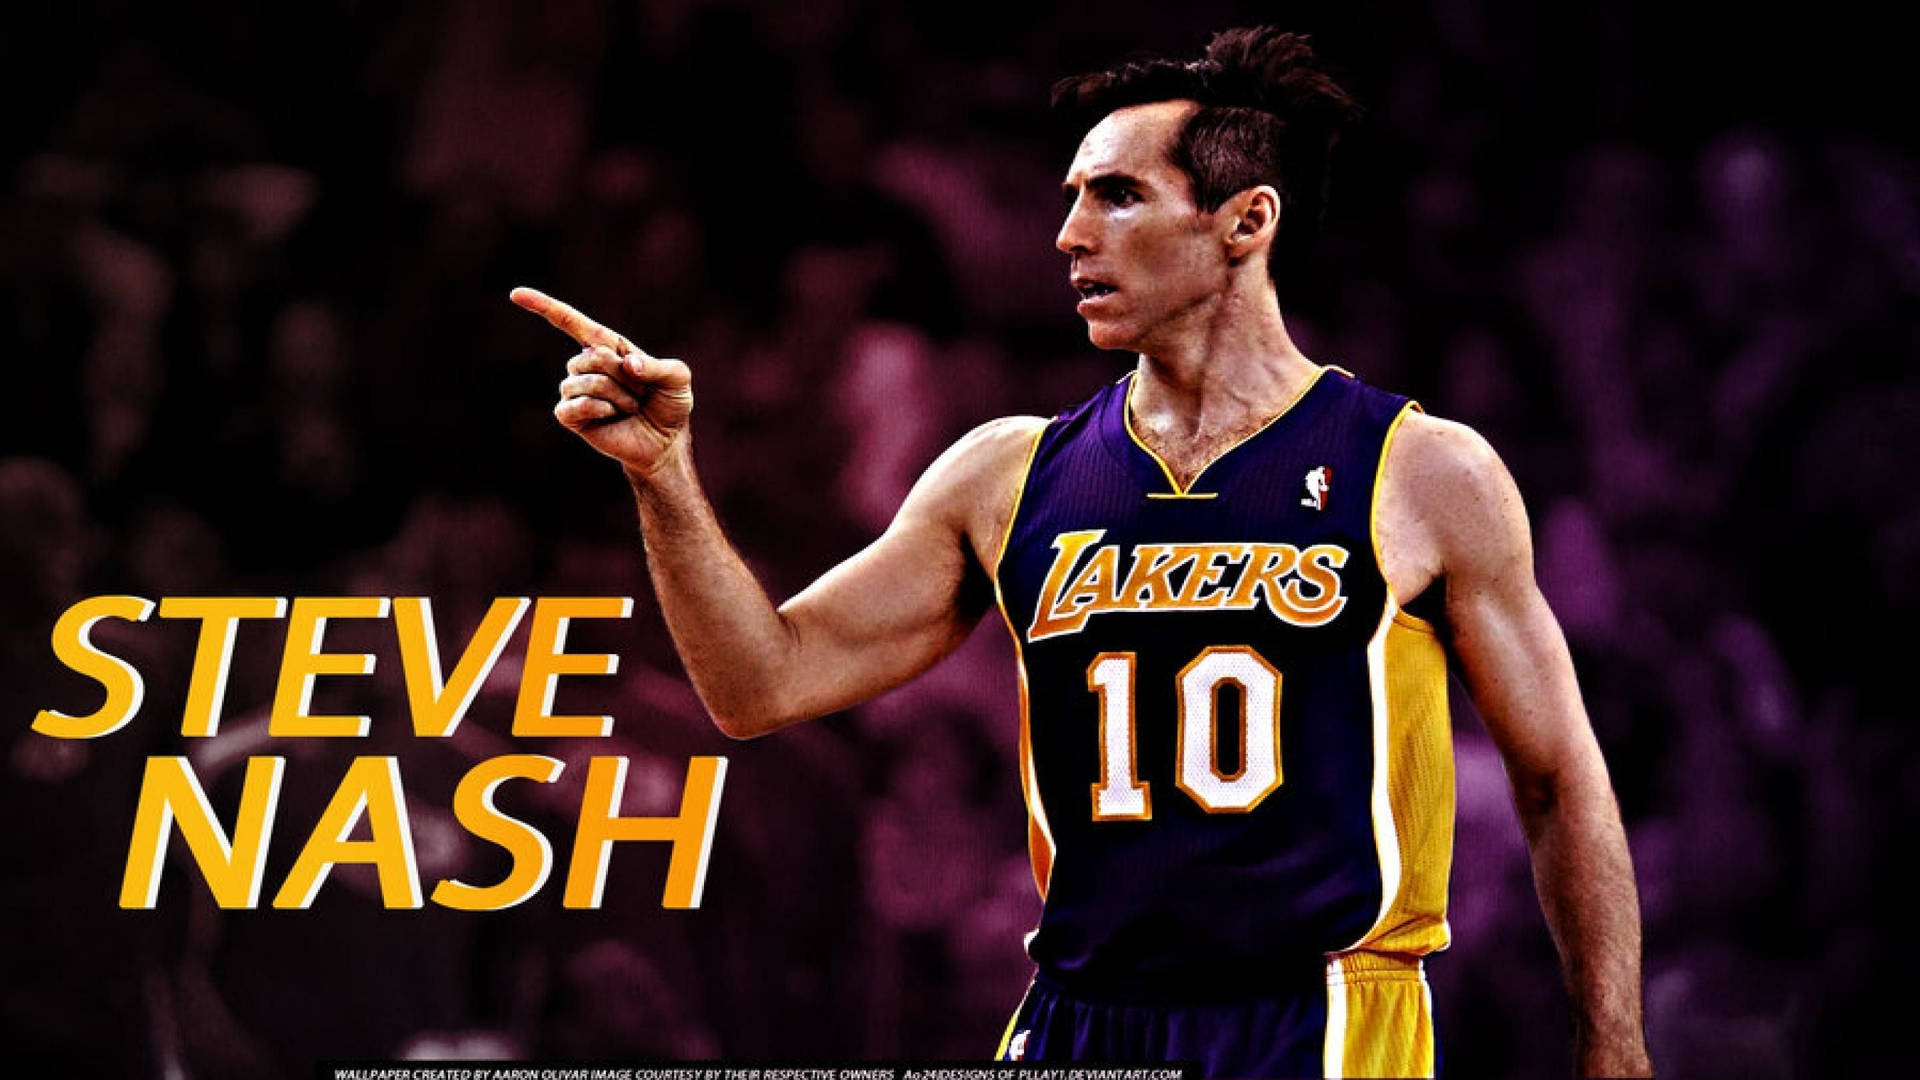 Steve Nash In Action For The Los Angeles Lakers Background